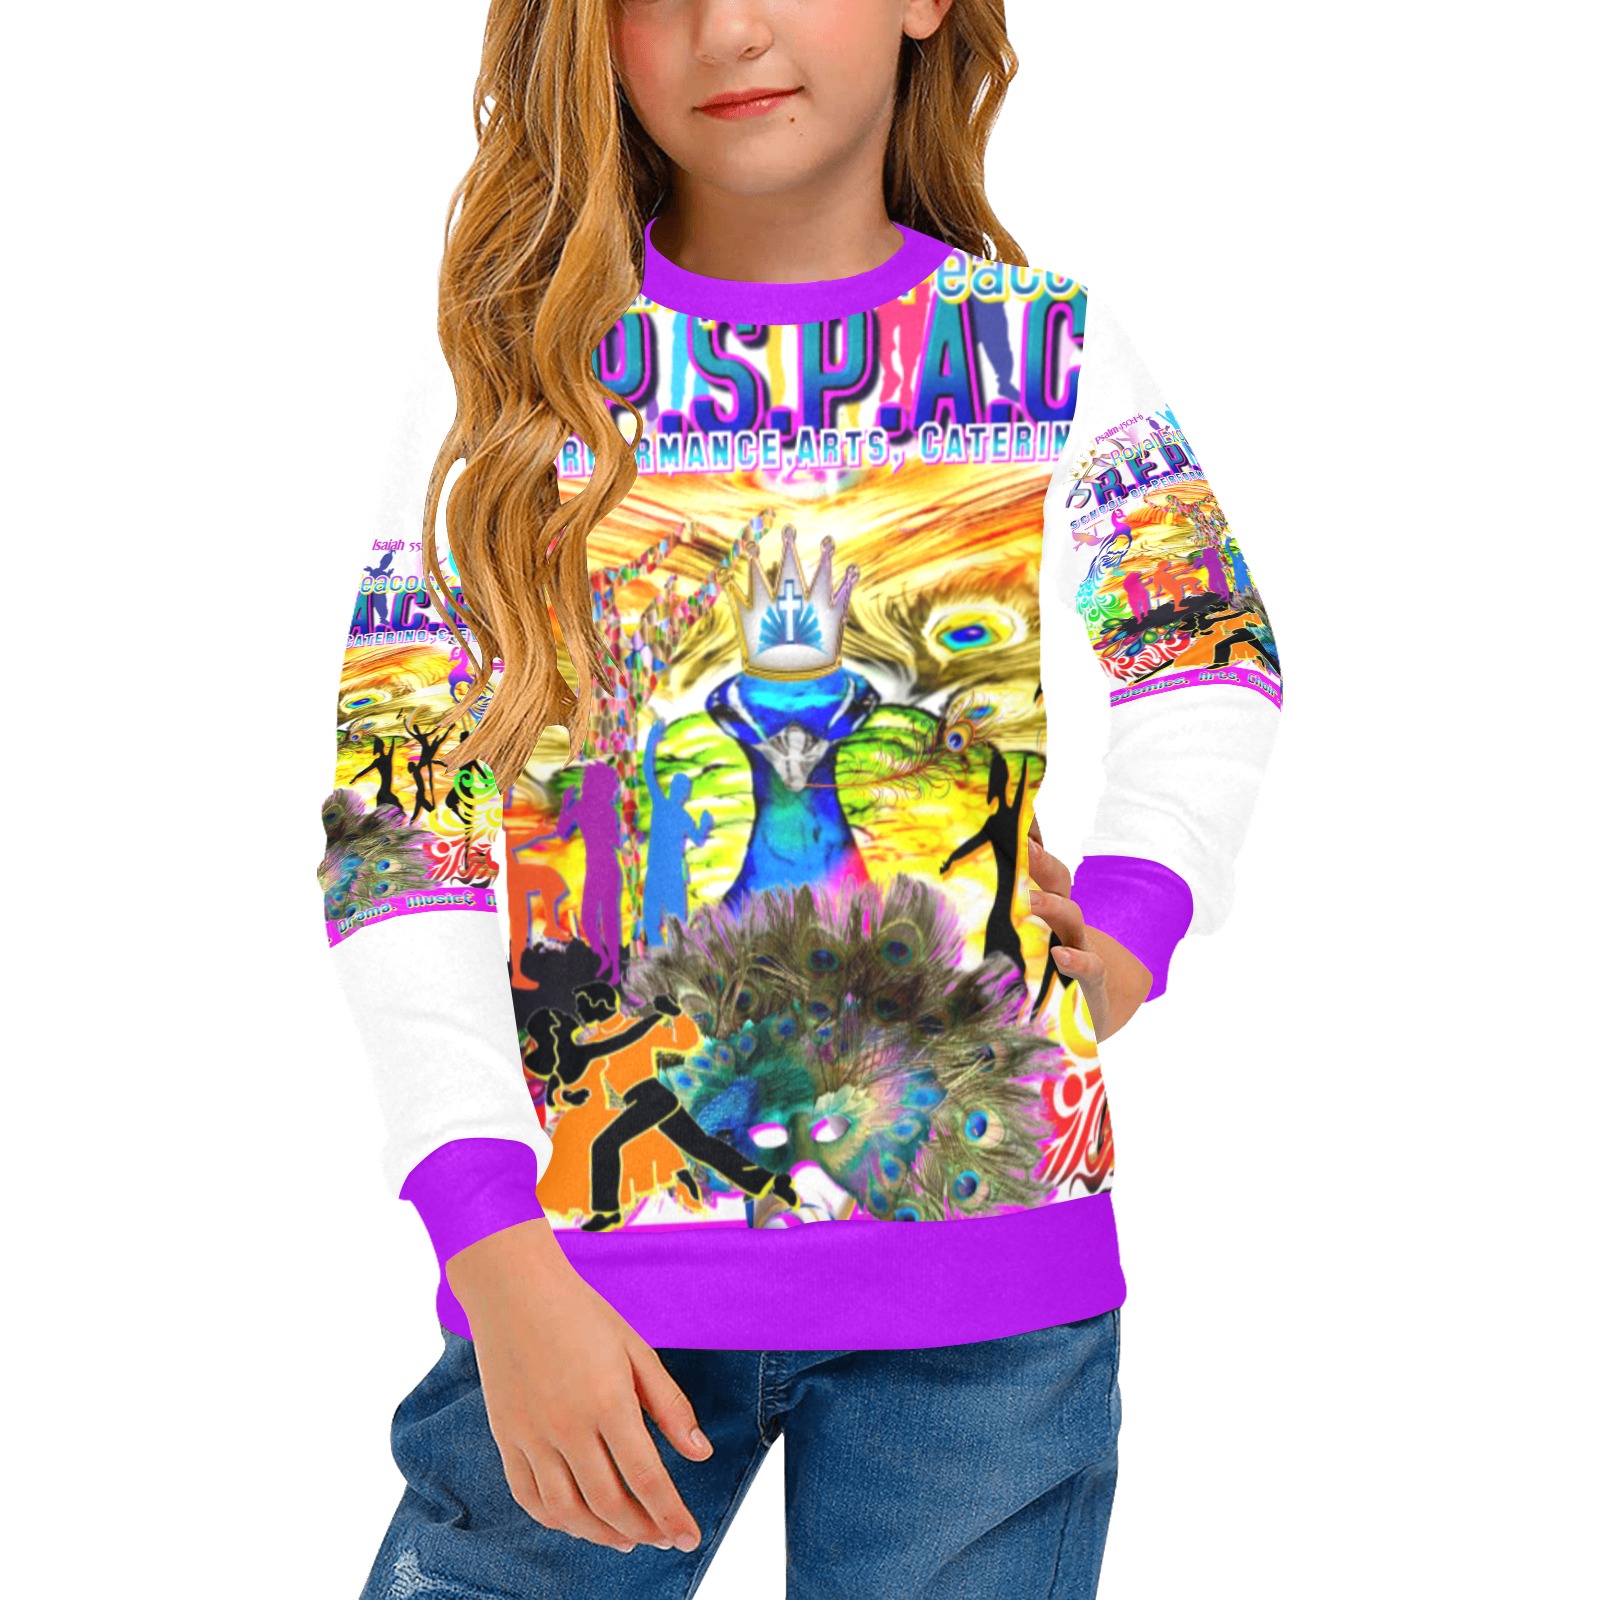 JNV REPSPACE COLORFUL Kid's purple long sleeve shirt(8) Girls' All Over Print Crew Neck Sweater (Model H49)